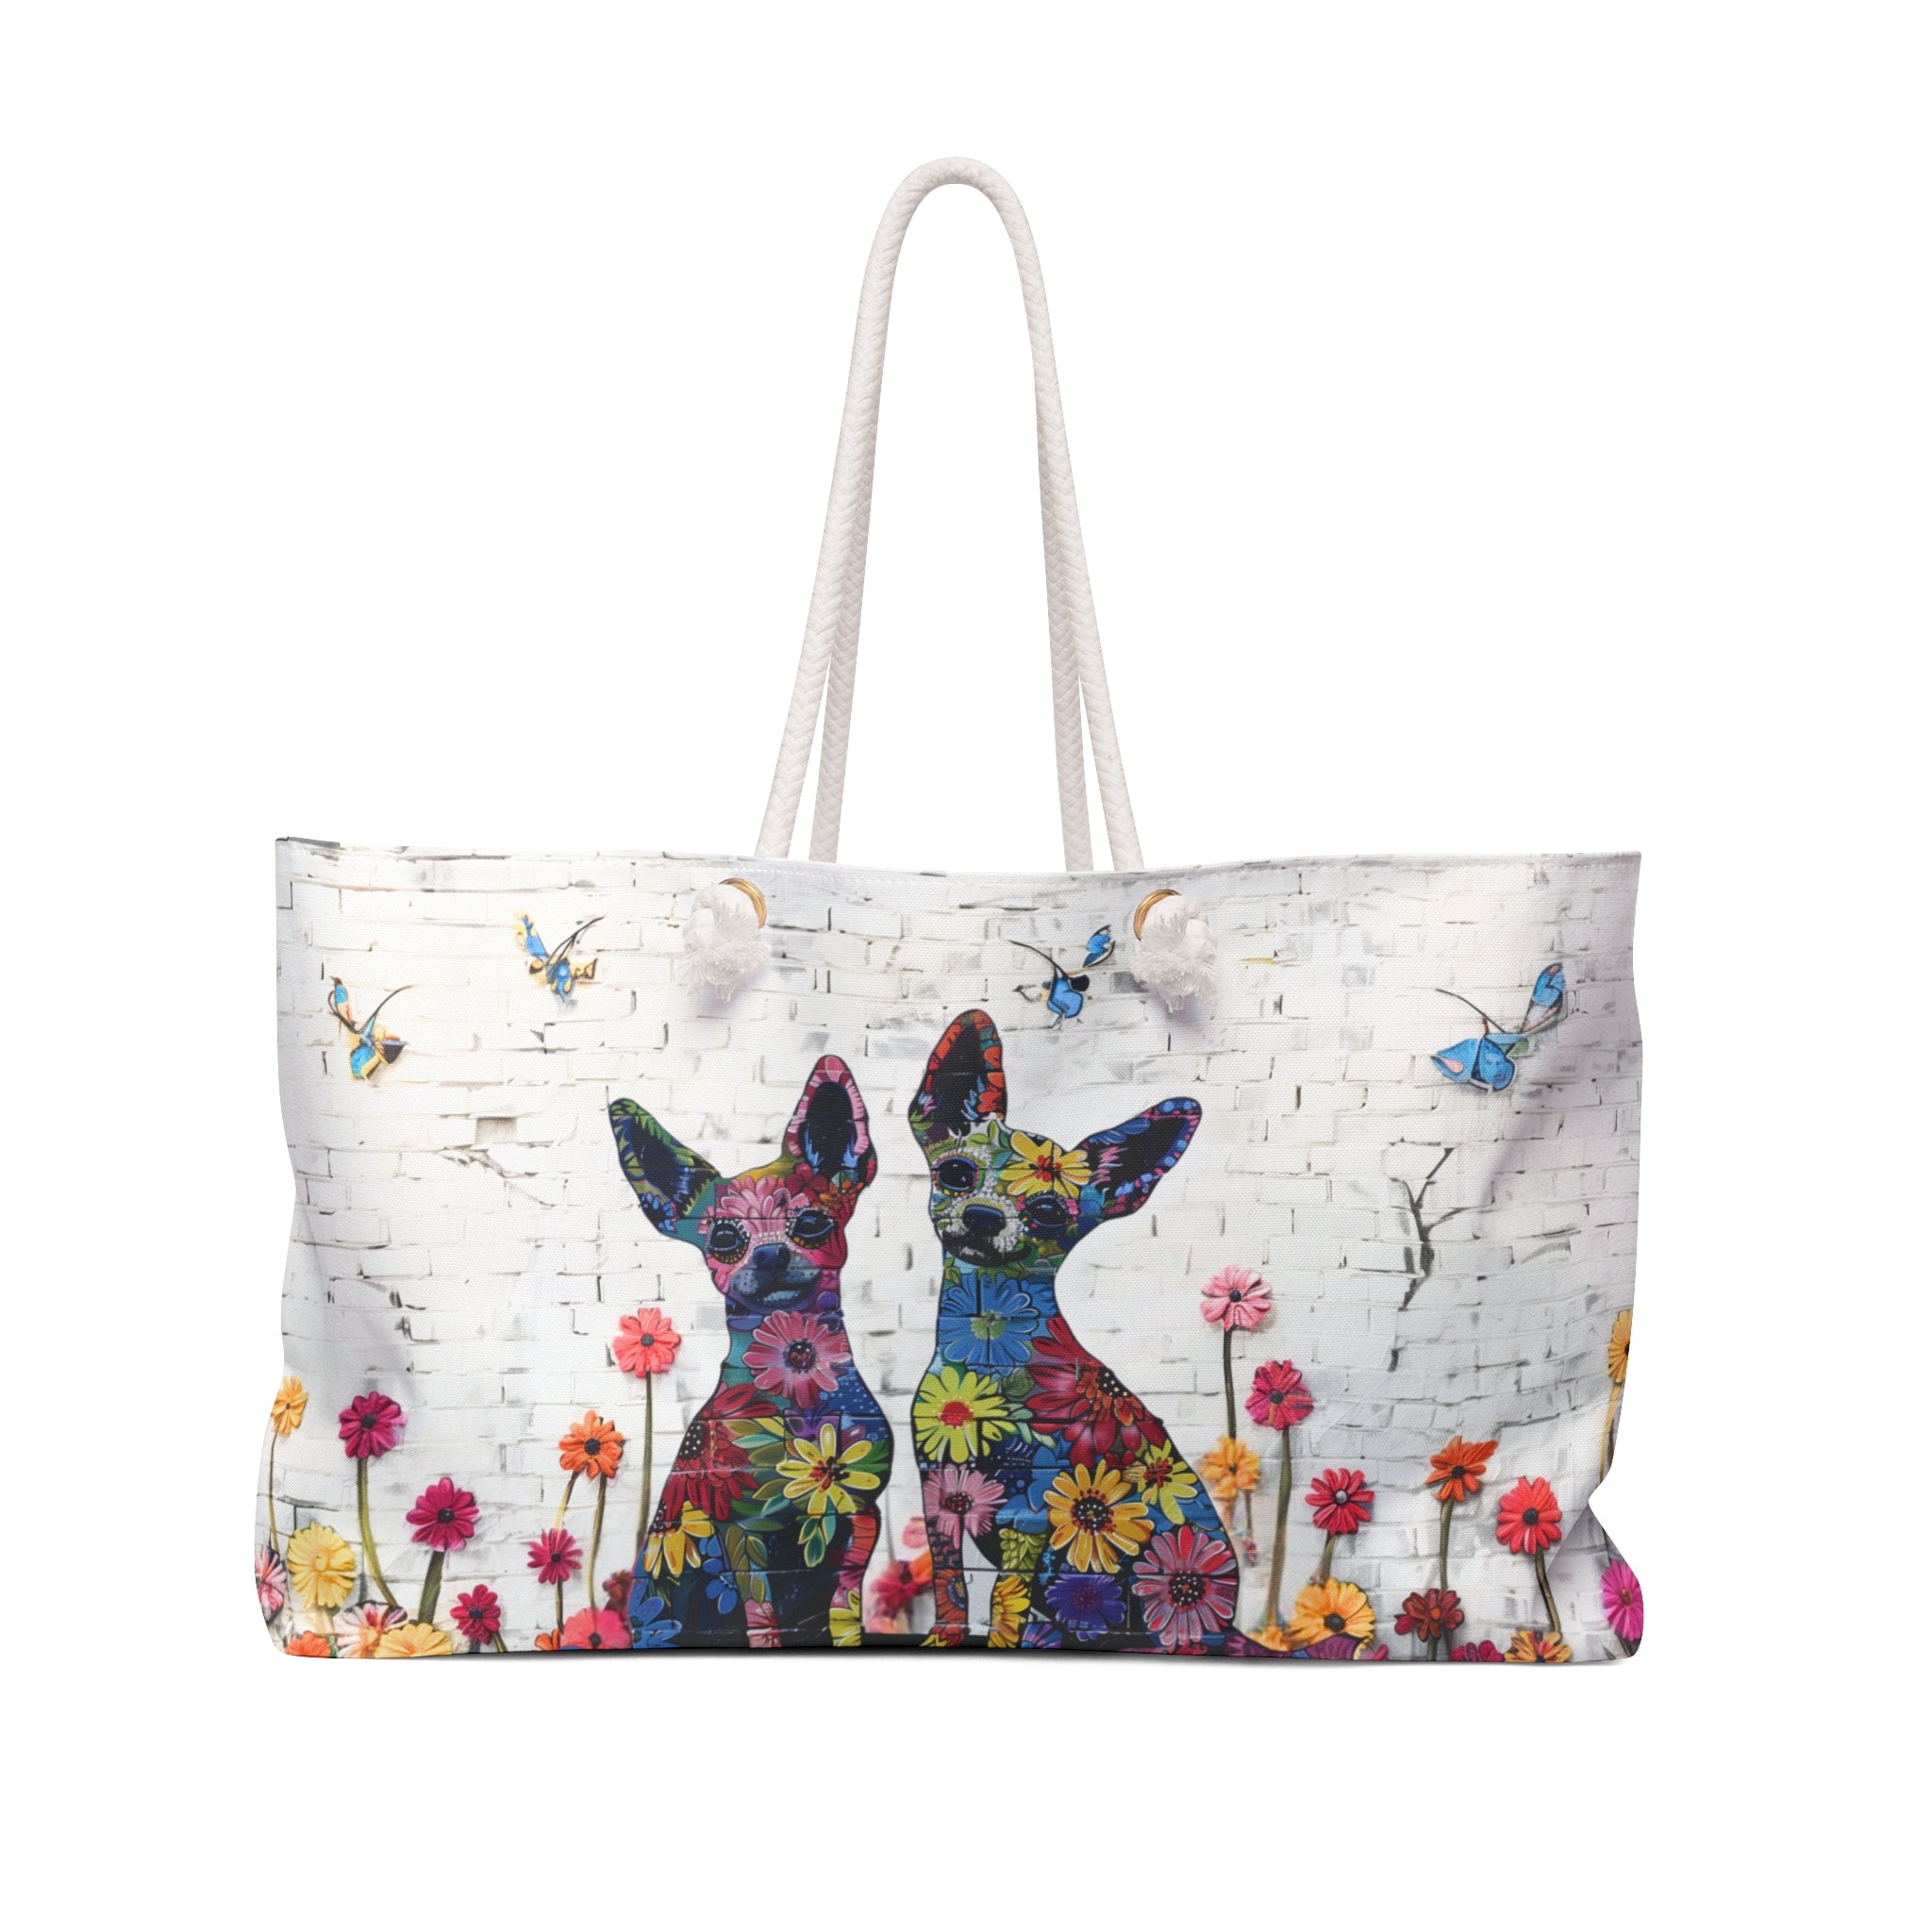 Chihuahua Original Floral Dog Art Themed Large Weekender Tote Bag - chihuahua-original-floral-dog-art-themed-large-weekender-tote-bag